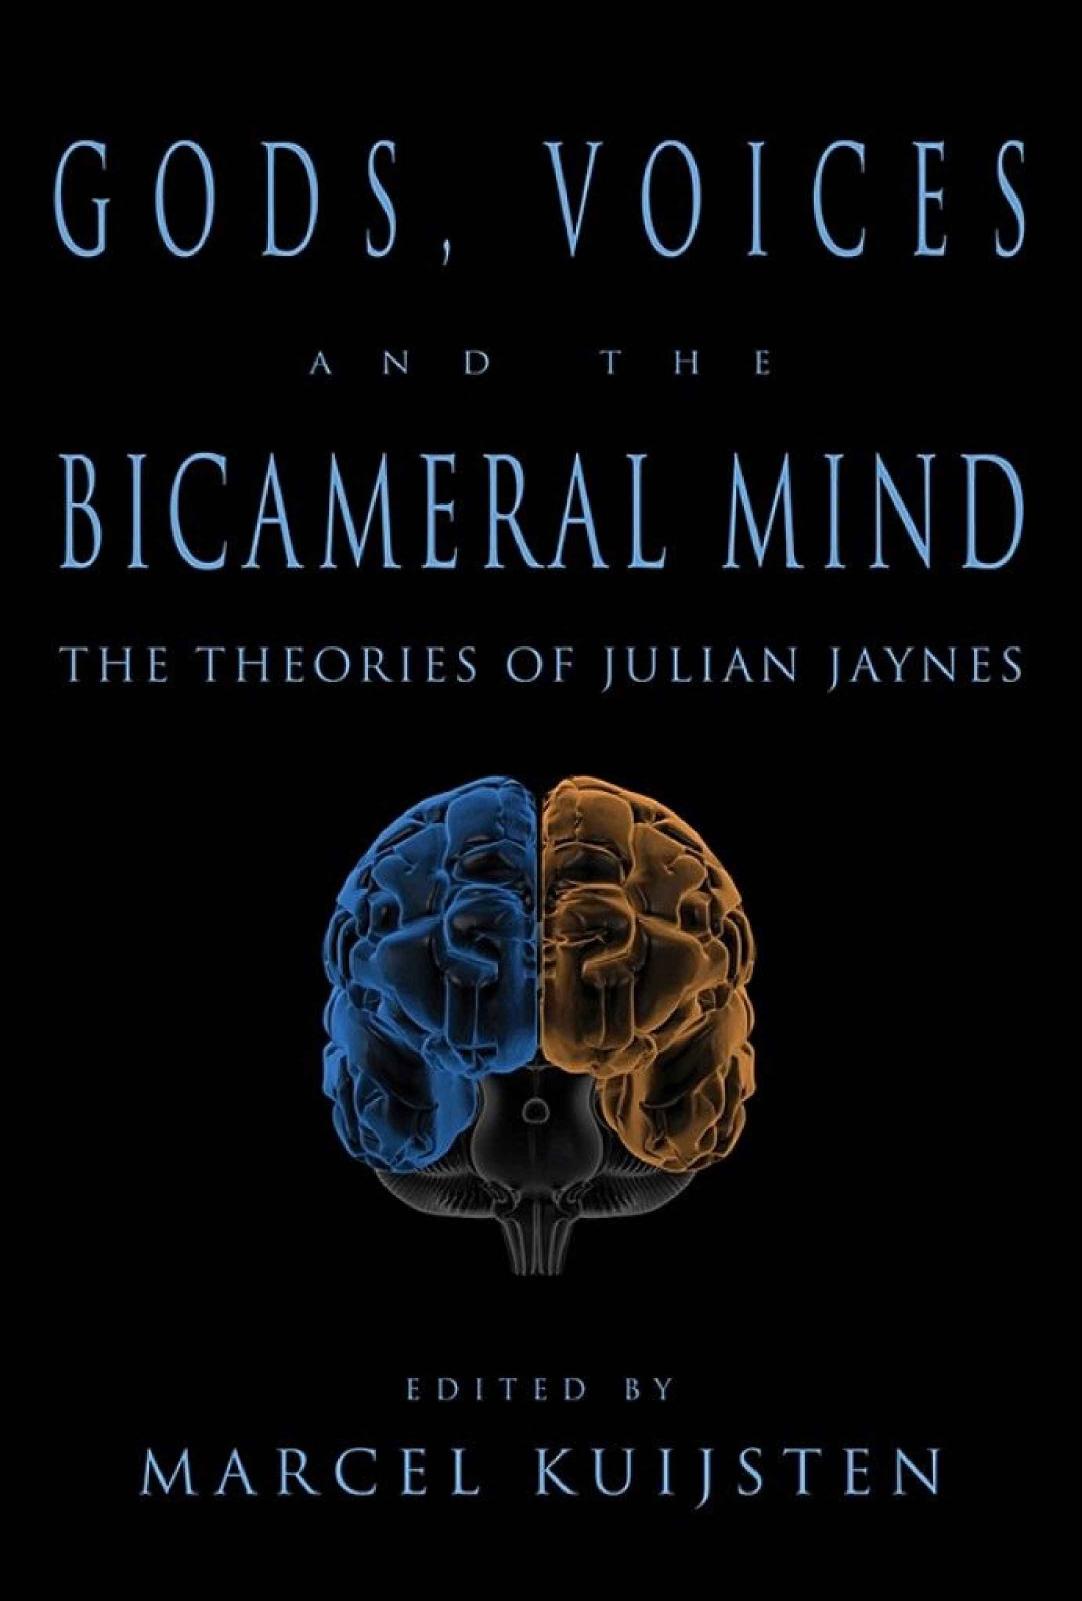 Conversations on Consciousness and the Bicameral Mind: Interviews With Leading Thinkers on Julian Jaynes's Theory